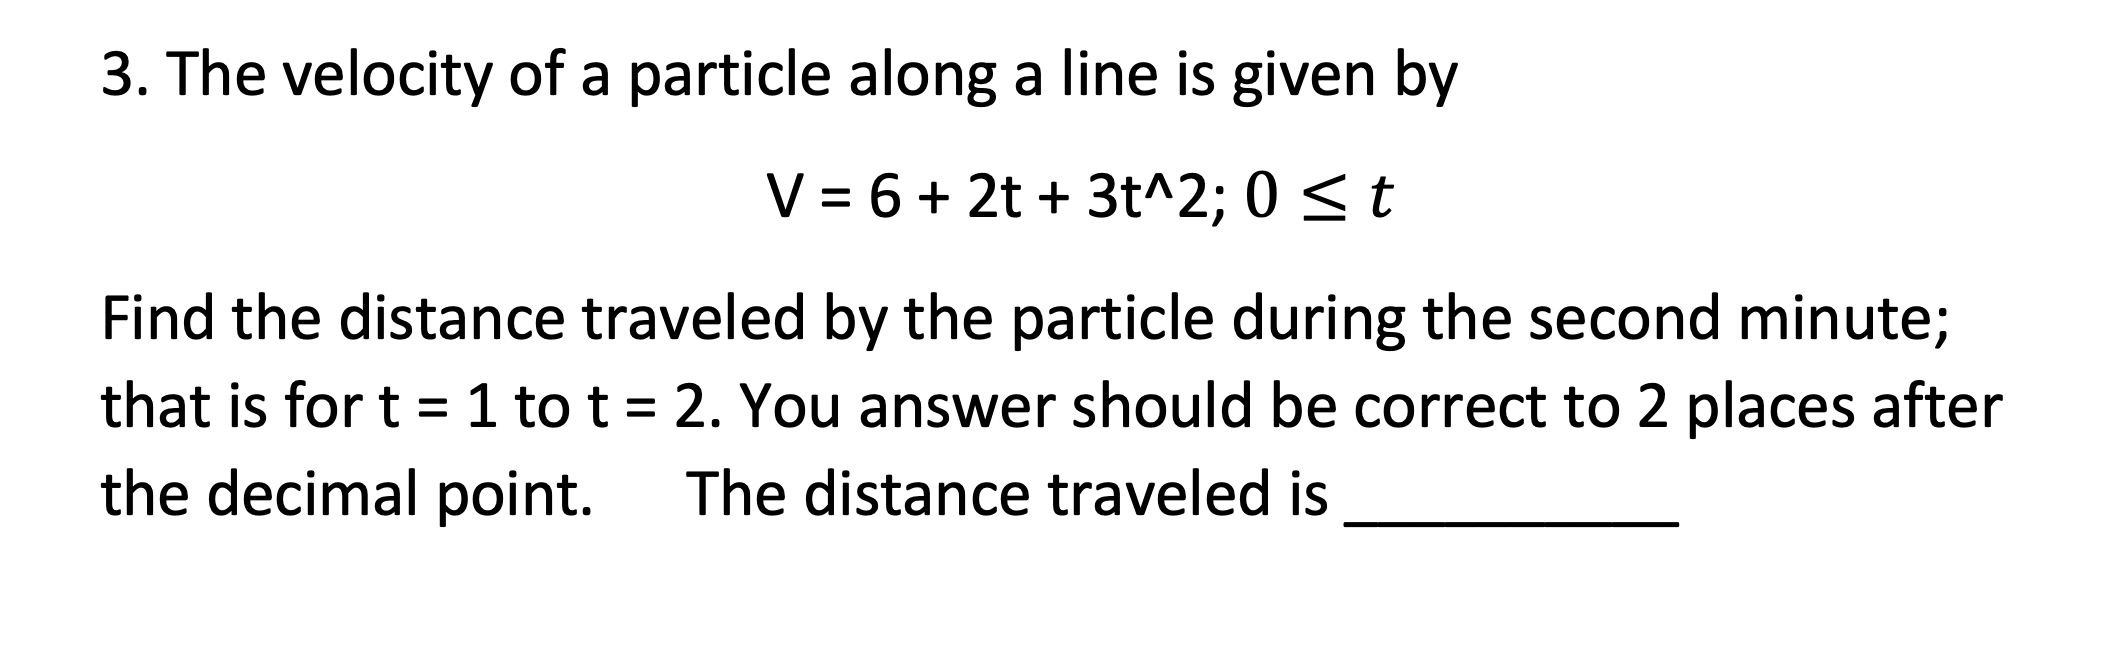 3. The velocity of a particle along a line is given by
V = 6 + 2t + 3t^2; 0 < t
Find the distance traveled by the particle during the second minute;
that is for t = 1 to t = 2. You answer should be correct to 2 places after
the decimal point.
The distance traveled is
